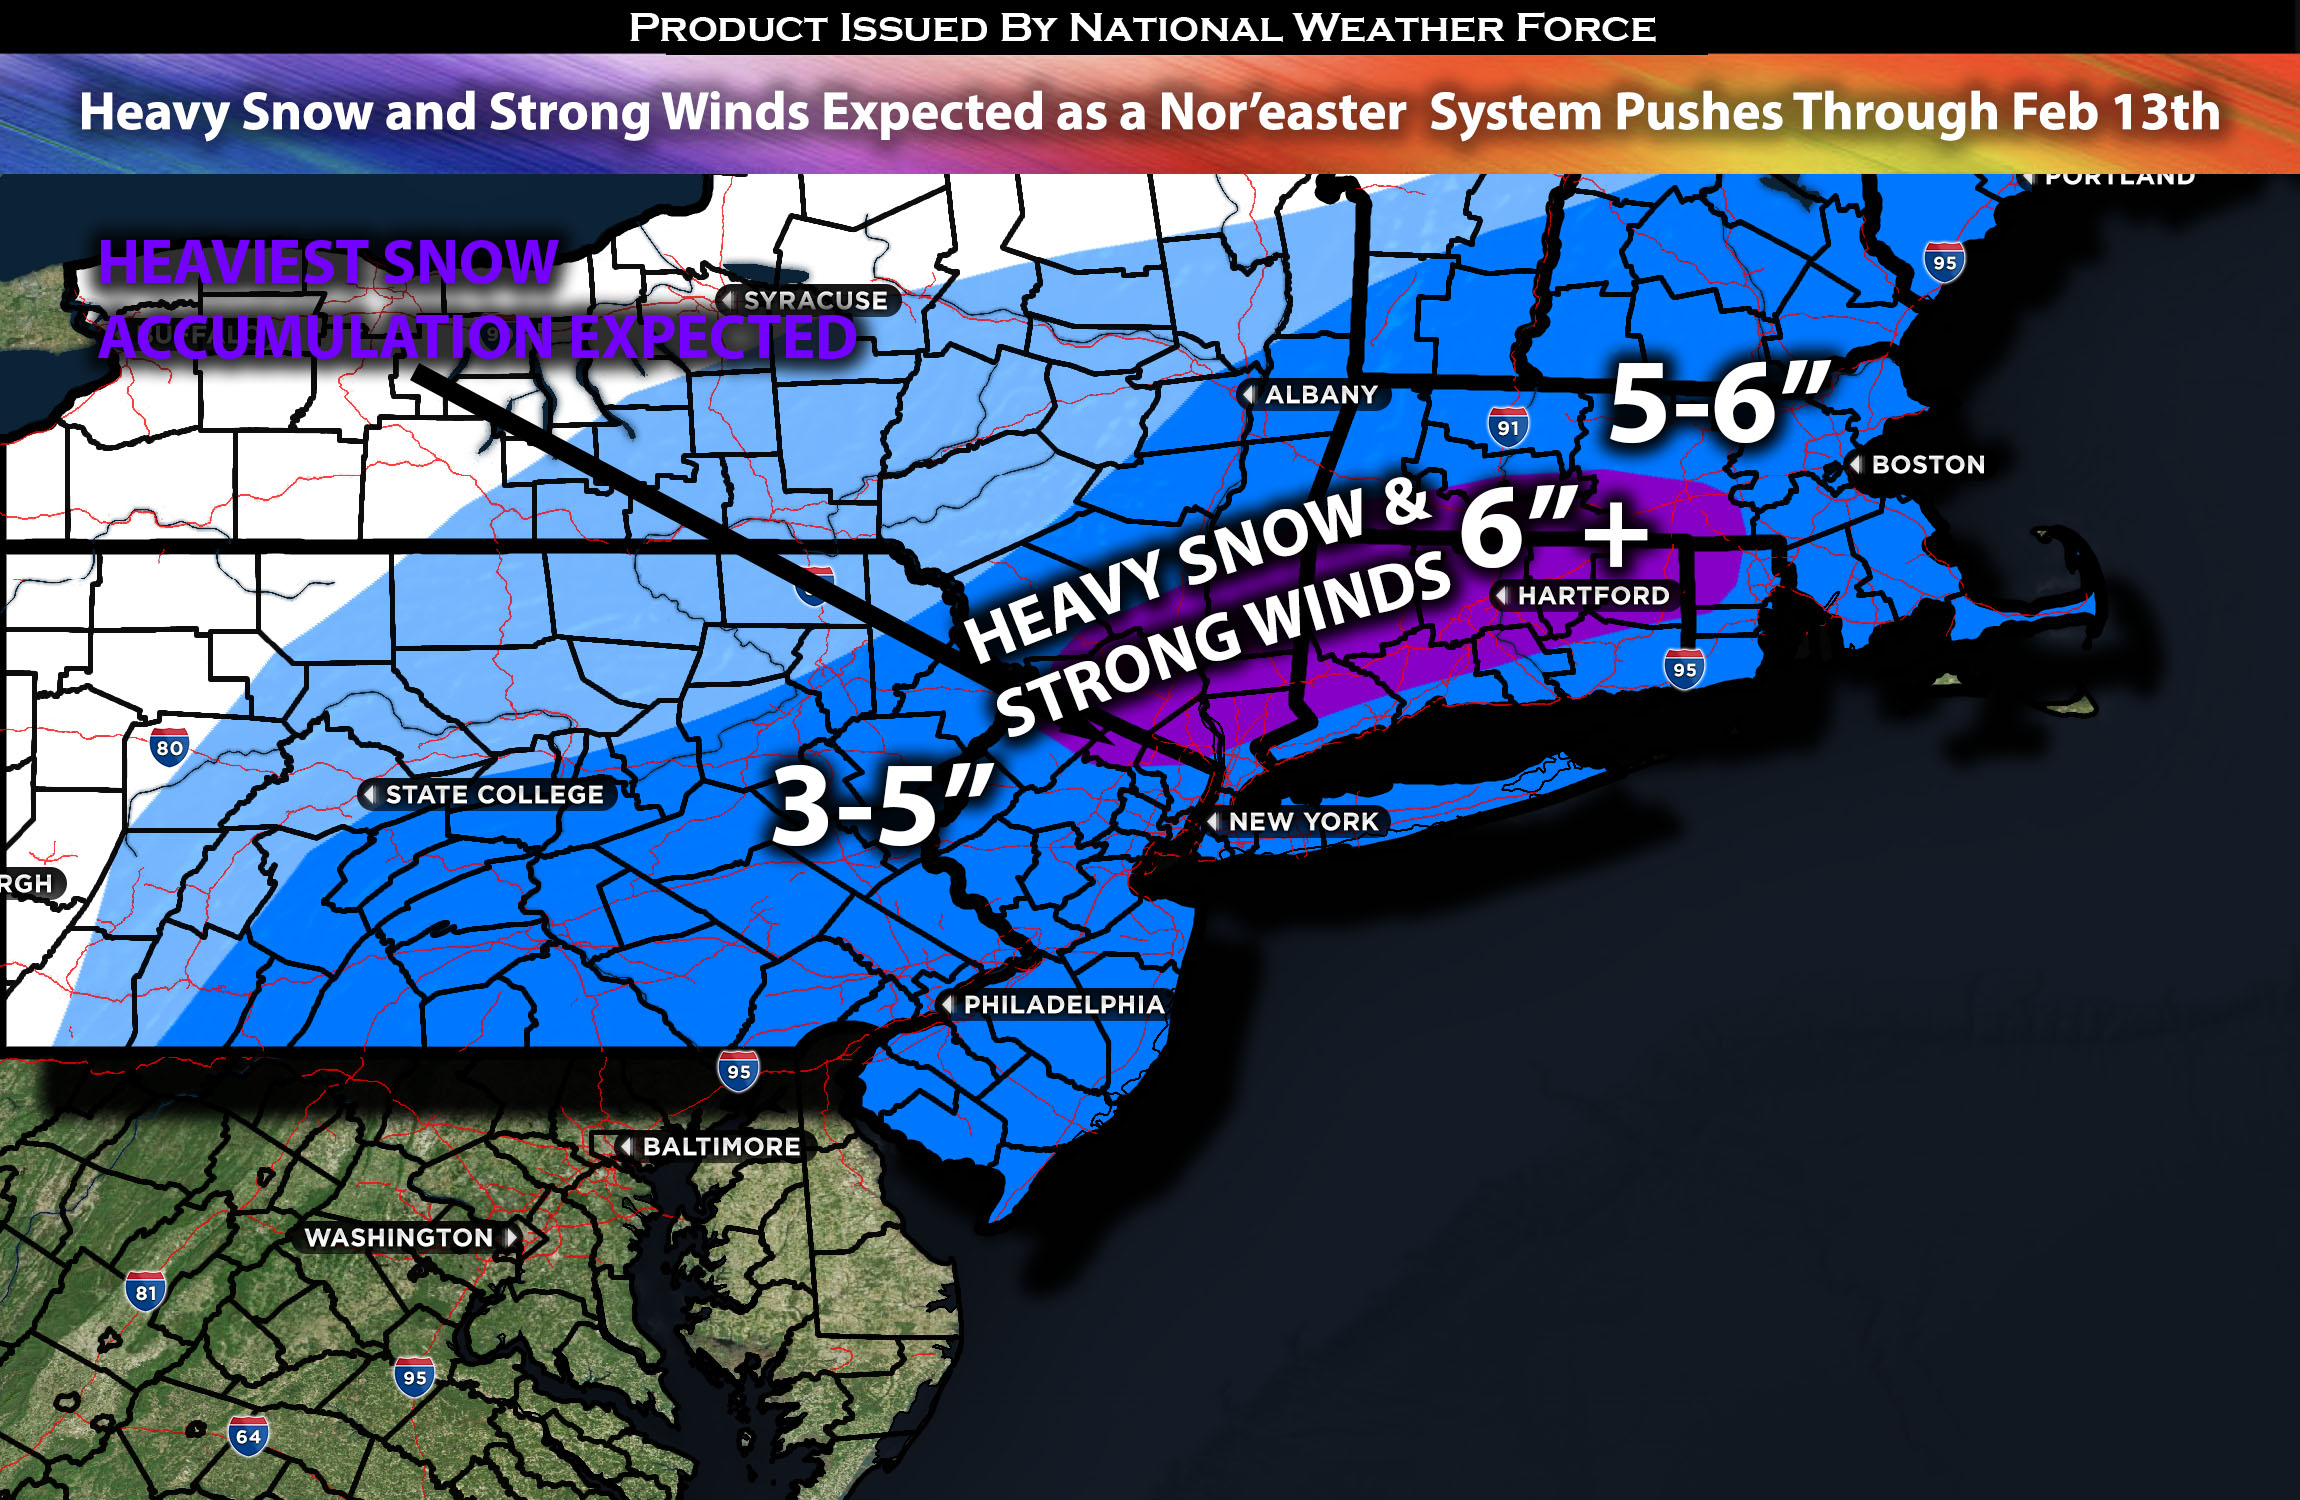 Heavy Snow and Strong Winds Expected as a Nor’easter Setup System Pushes Through Feb 13th